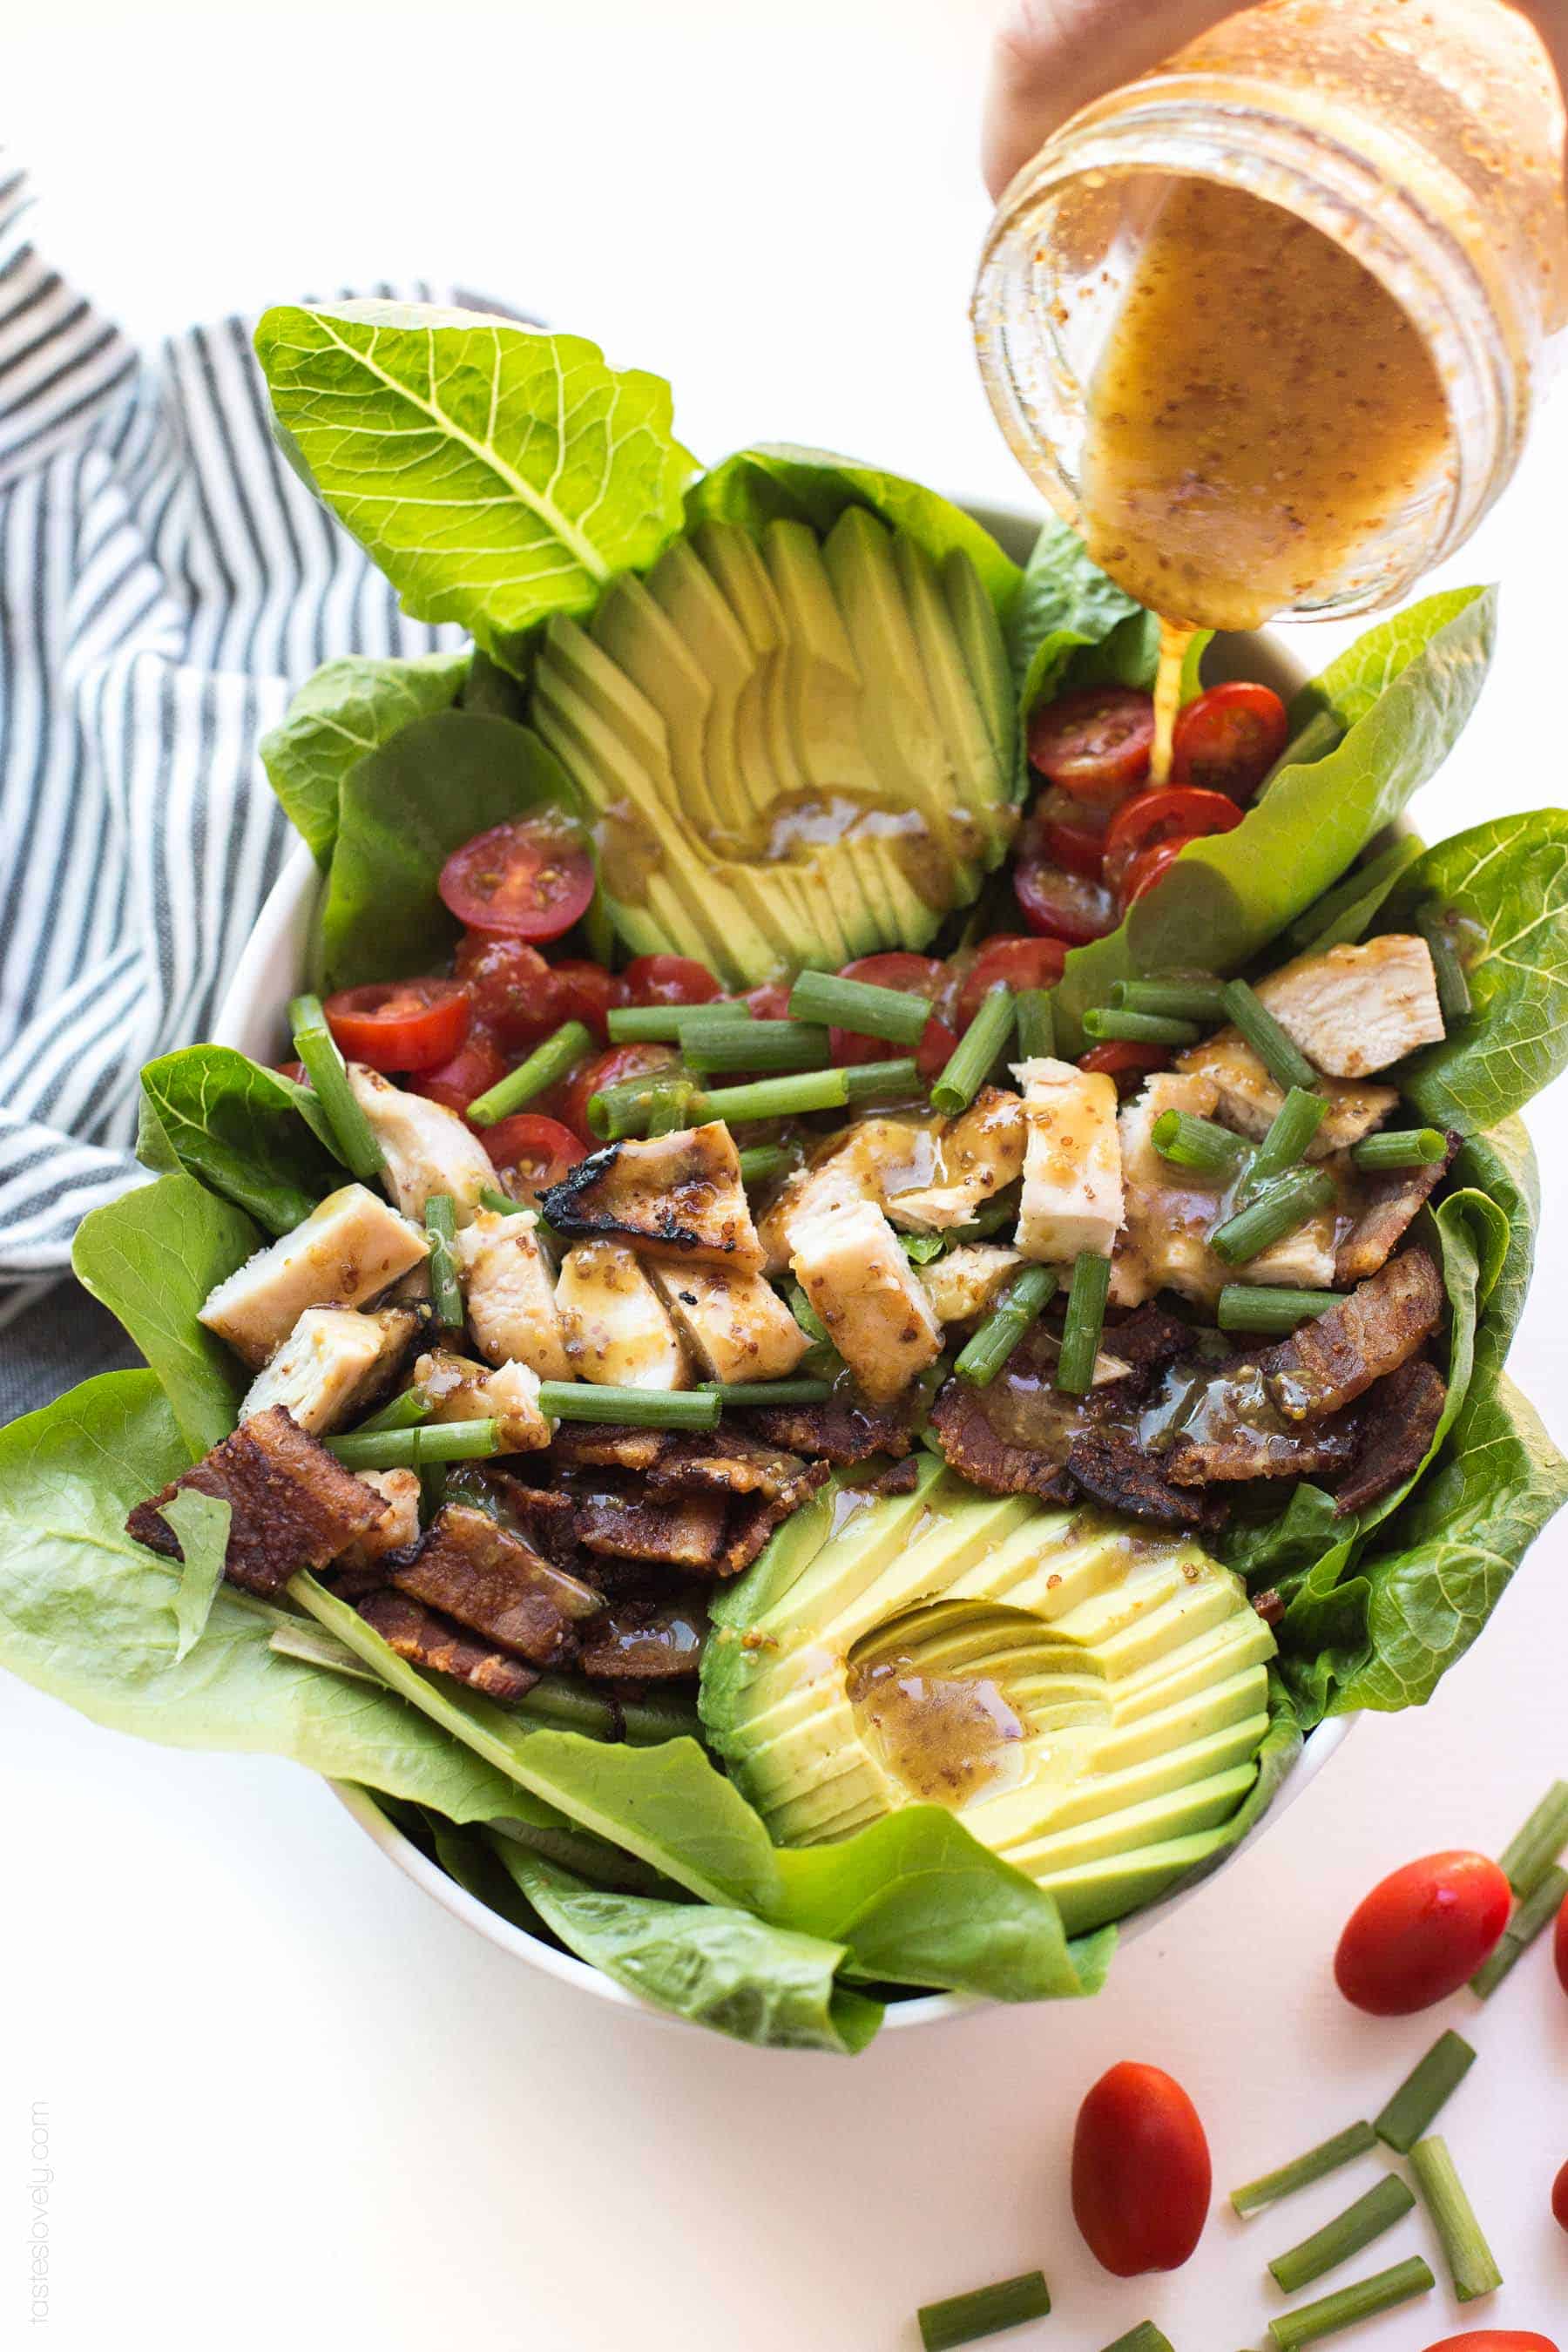 Paleo Honey Mustard Chicken, Bacon & Avocado Salad with tomatoes. A delicious and healthy summer dinner recipe that is paleo, gluten free, dairy free, refined sugar free.